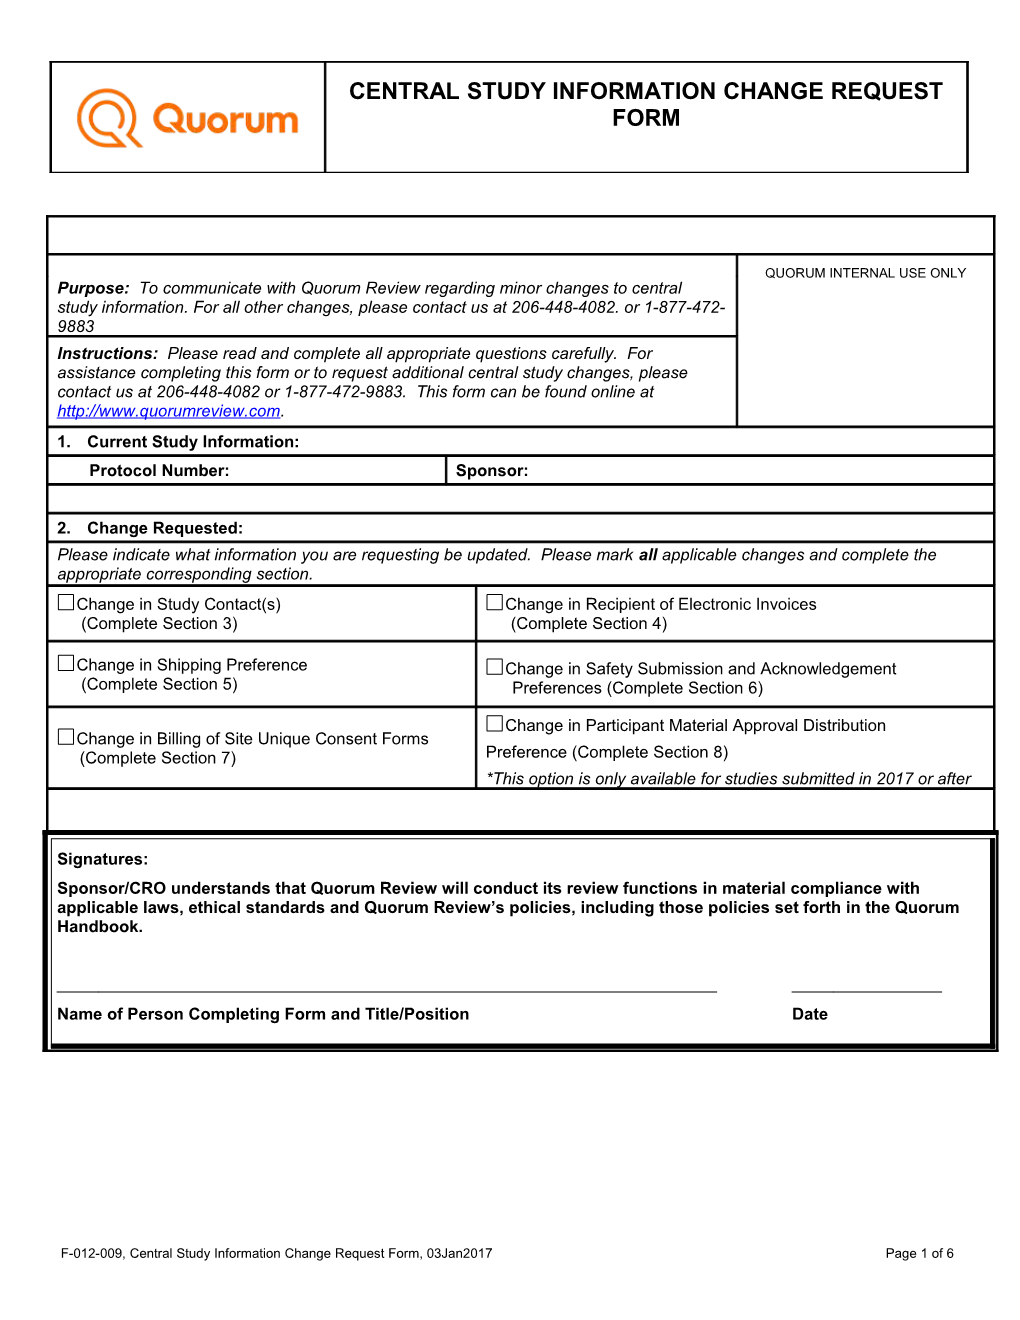 F-012-009, Central Study Information Change Request Form, 03Jan2017 Page 6 of 6